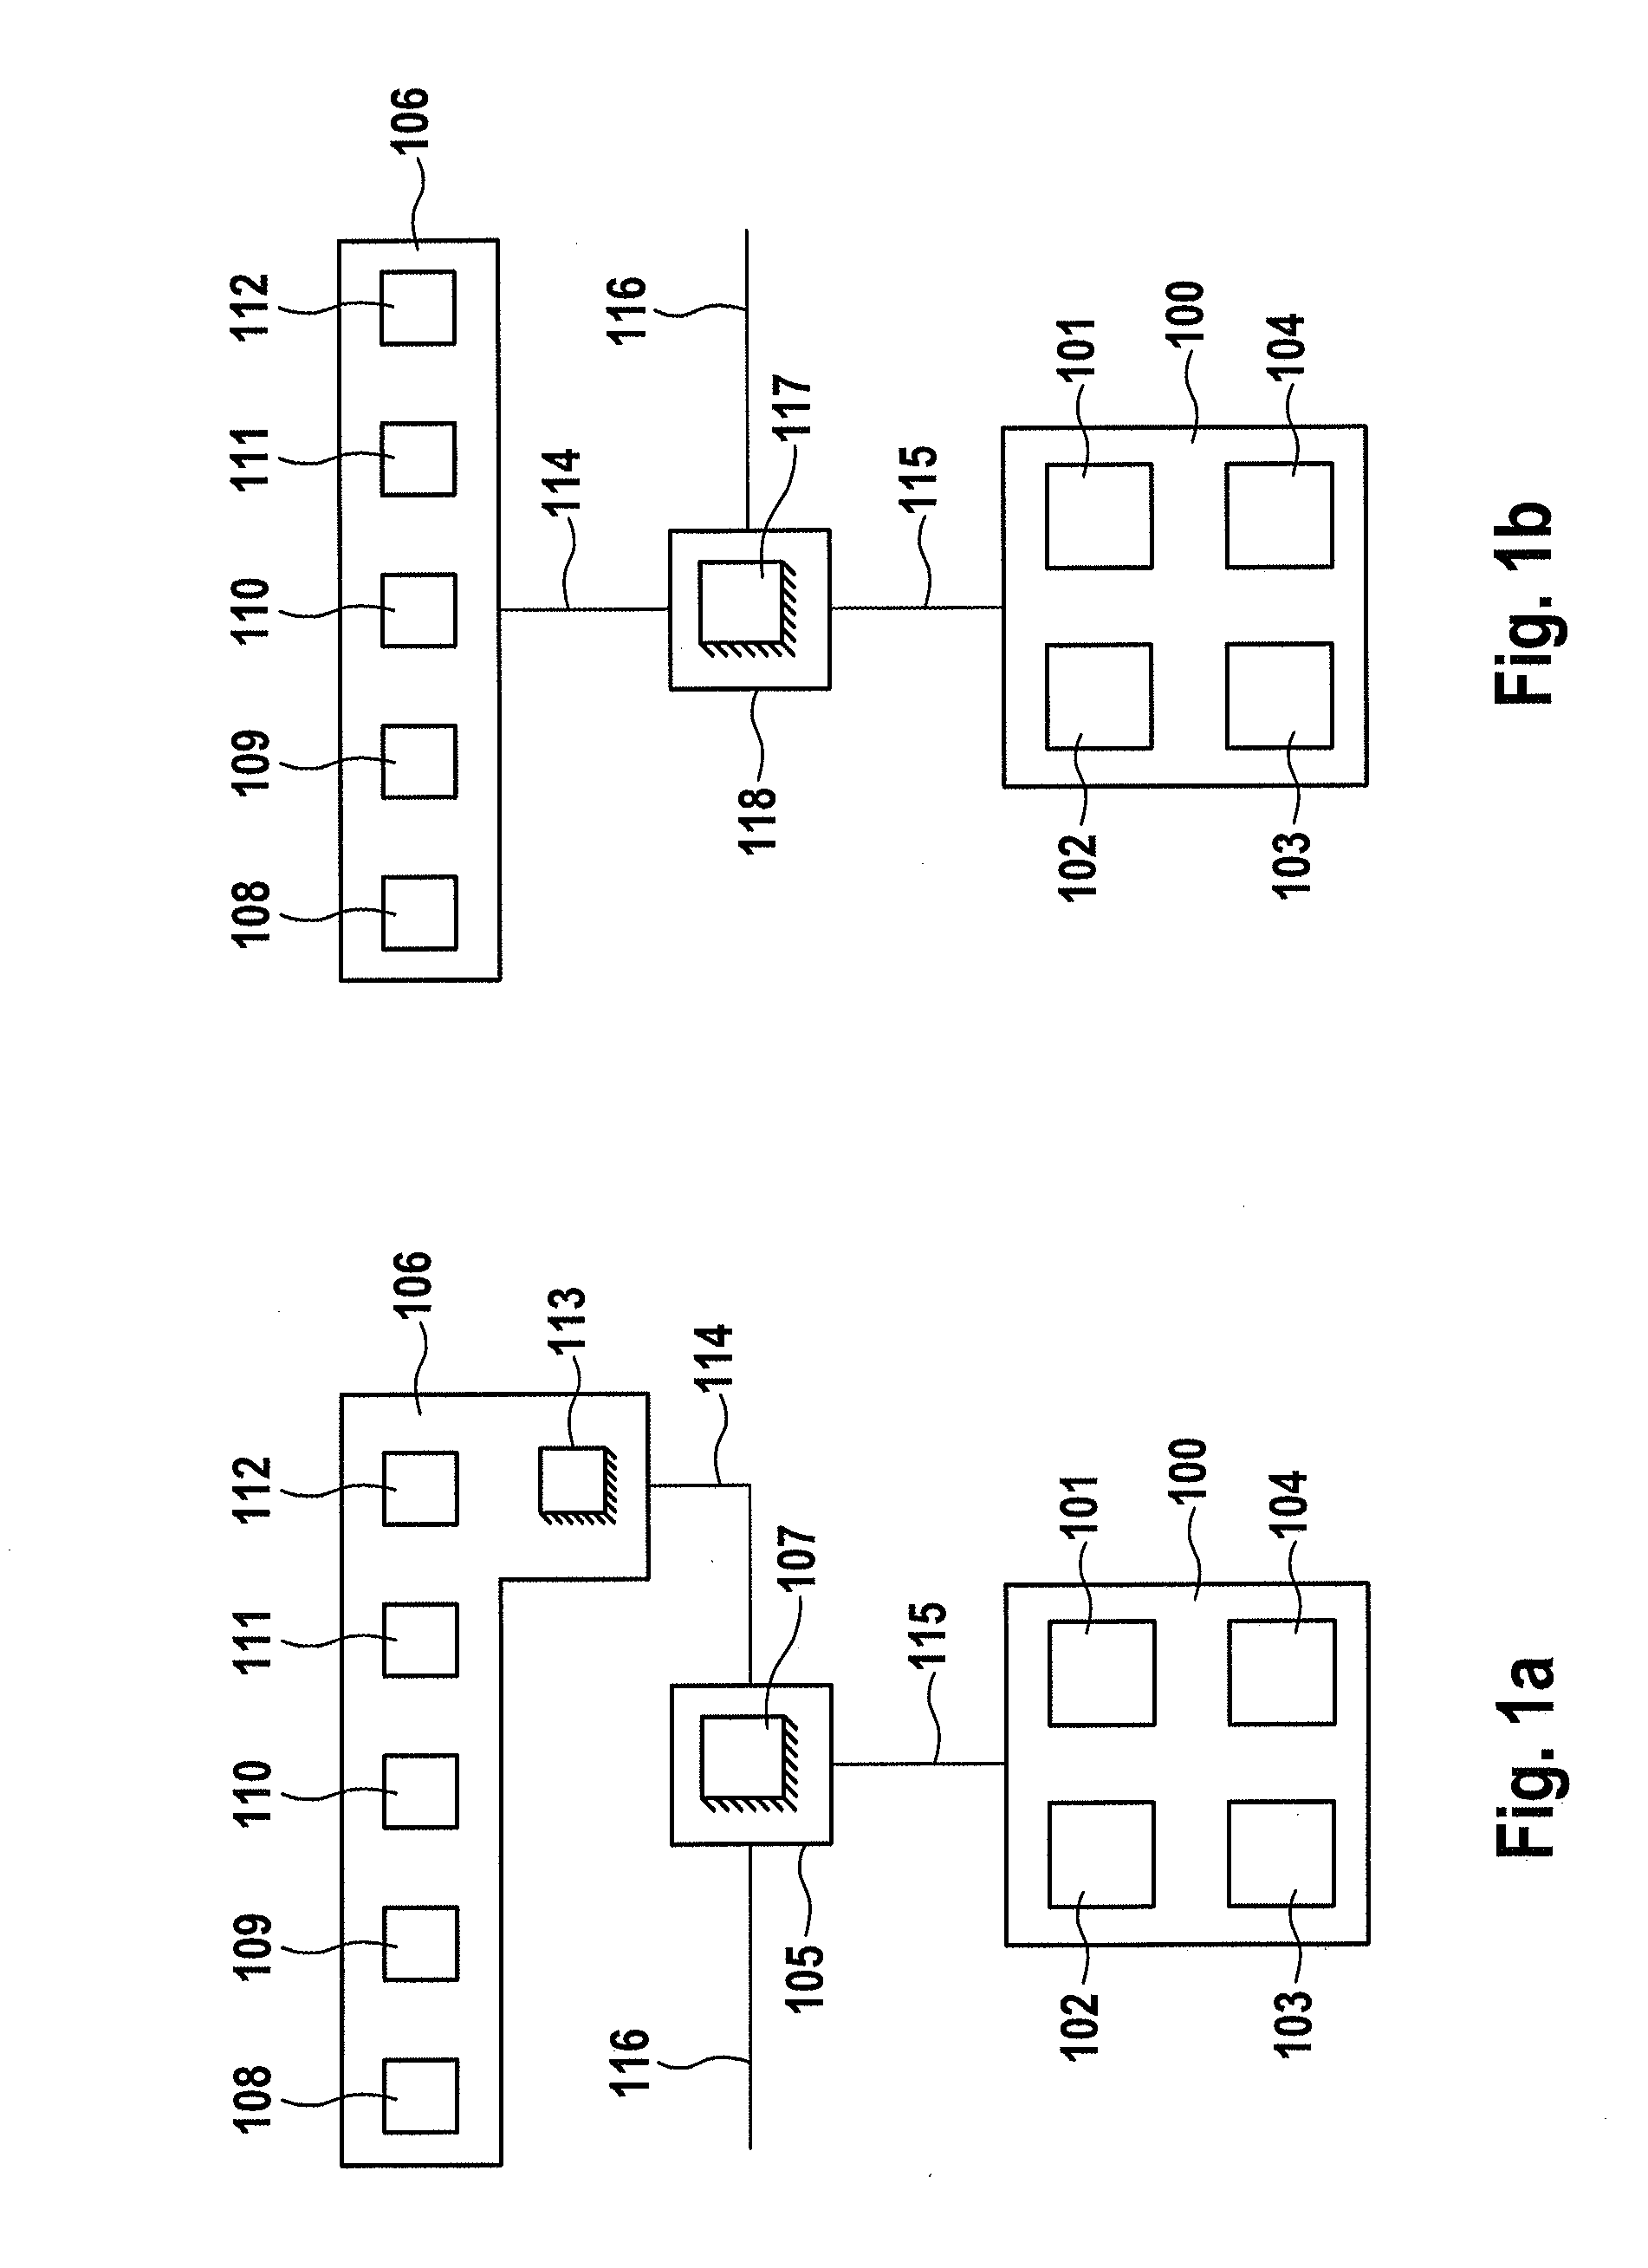 Method and system for validating information